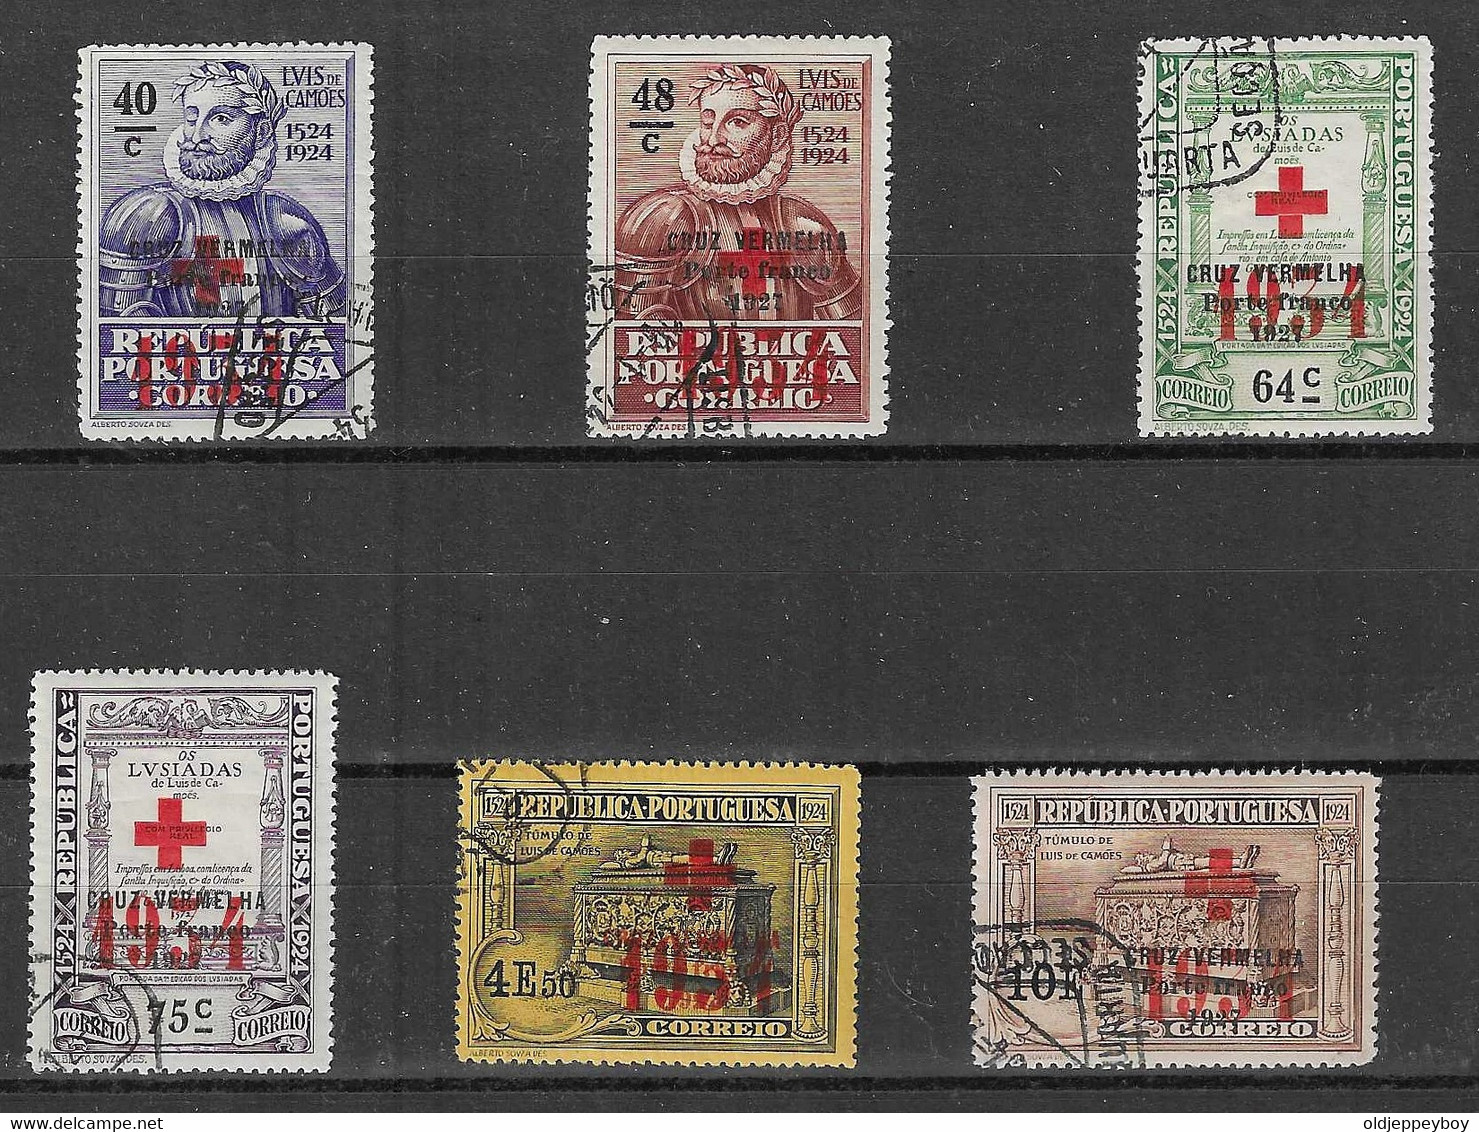 CROIX ROUGE CRUZ VERMELHA  Portugal - 1934 Camoes Franchise Red Cross (Complete Set) - USED - Croce Rossa